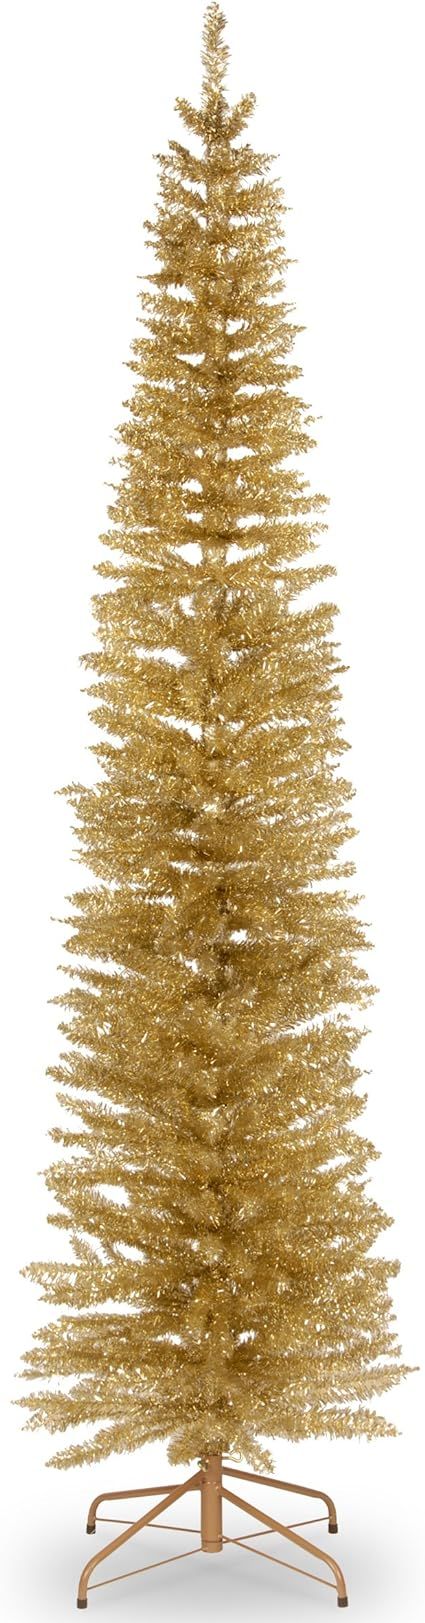 National Tree Company Artificial Christmas Tree, Champagne Gold Tinsel, Includes Stand, 7 feet | Amazon (US)